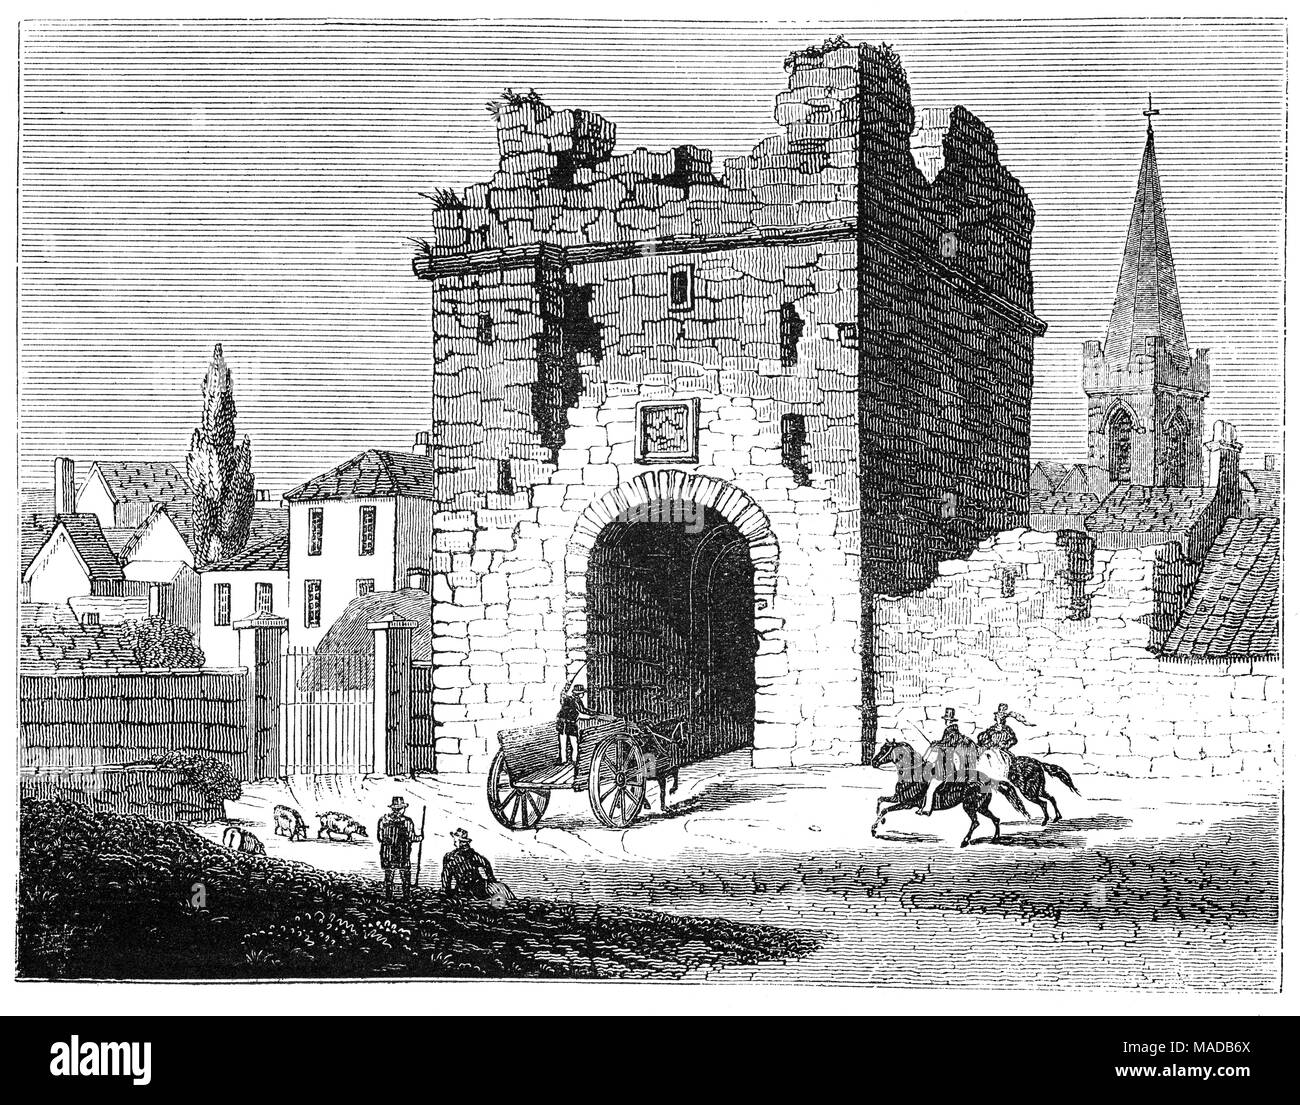 The sixteenth century North Gate (now demolished)  which formed part of the Town Walls of Athlone. The town  owes much to the location of a strategic ford (river crossing point) on the River Shannon. It straddles the border between County Westmeath and County Roscommon, Ireland. Stock Photo